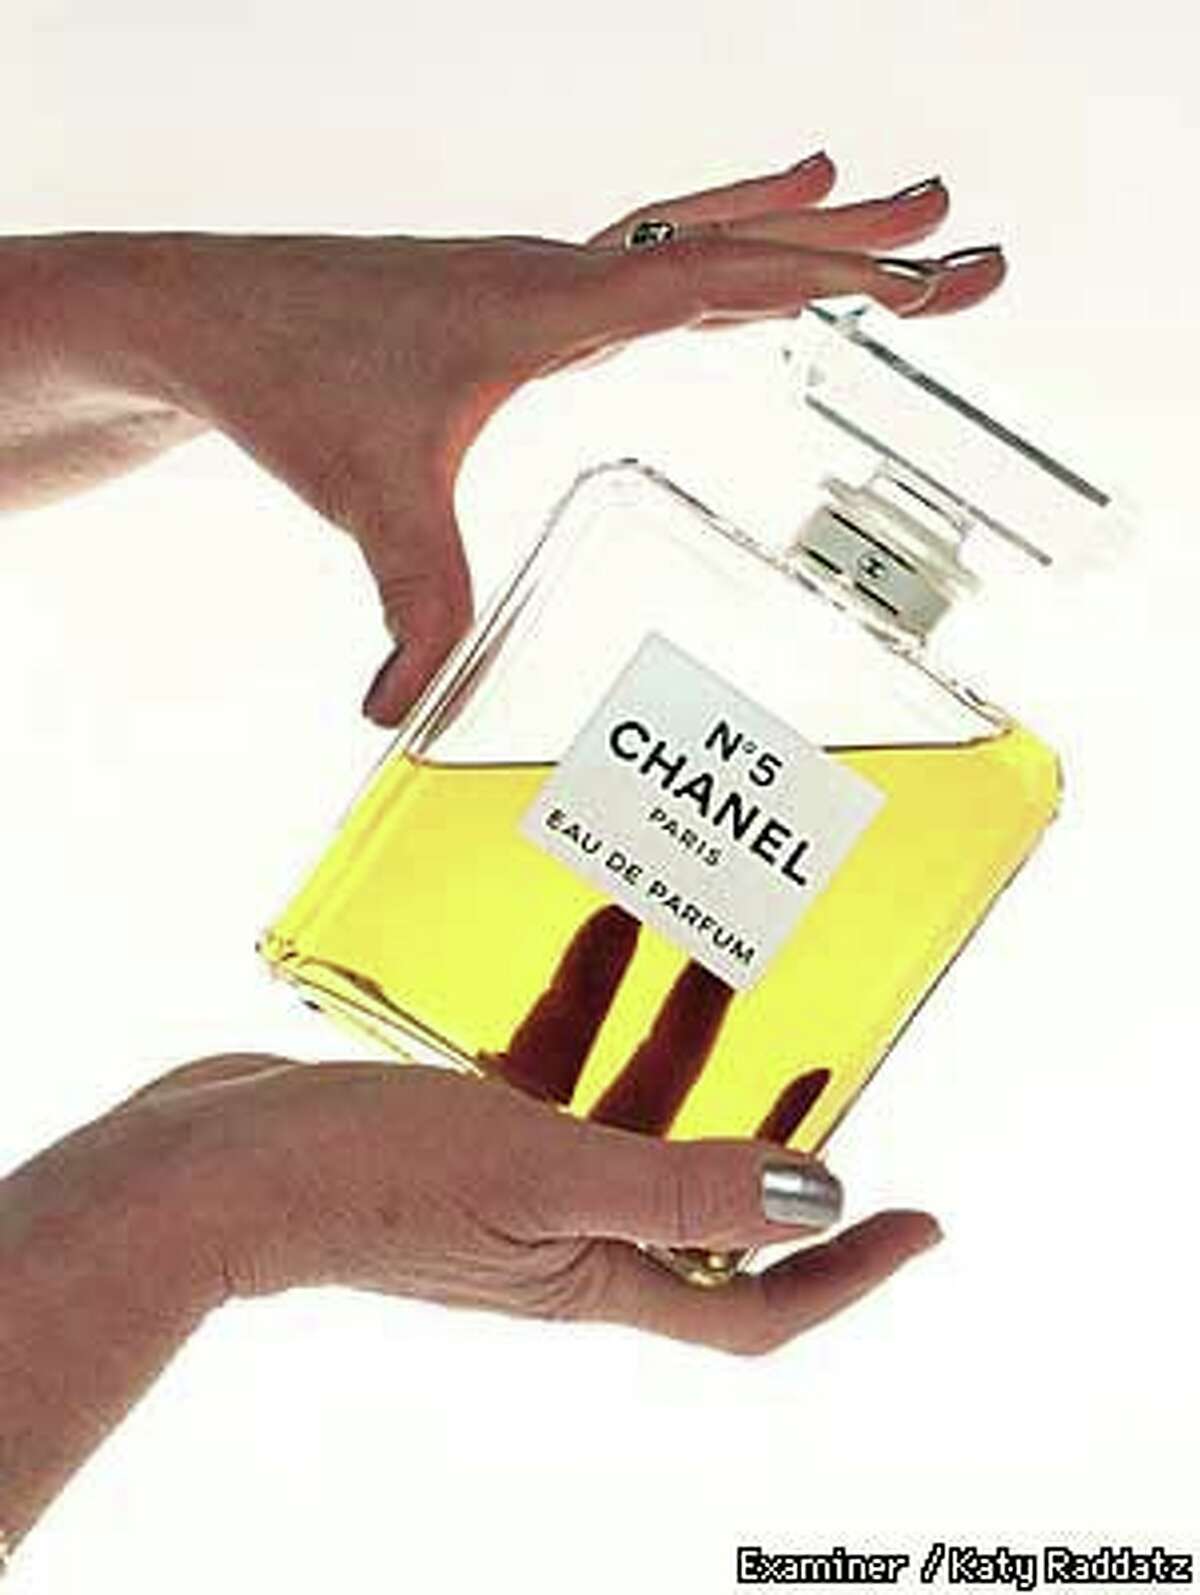 Why the Chanel No. 5 bottle is just as iconic as the perfume